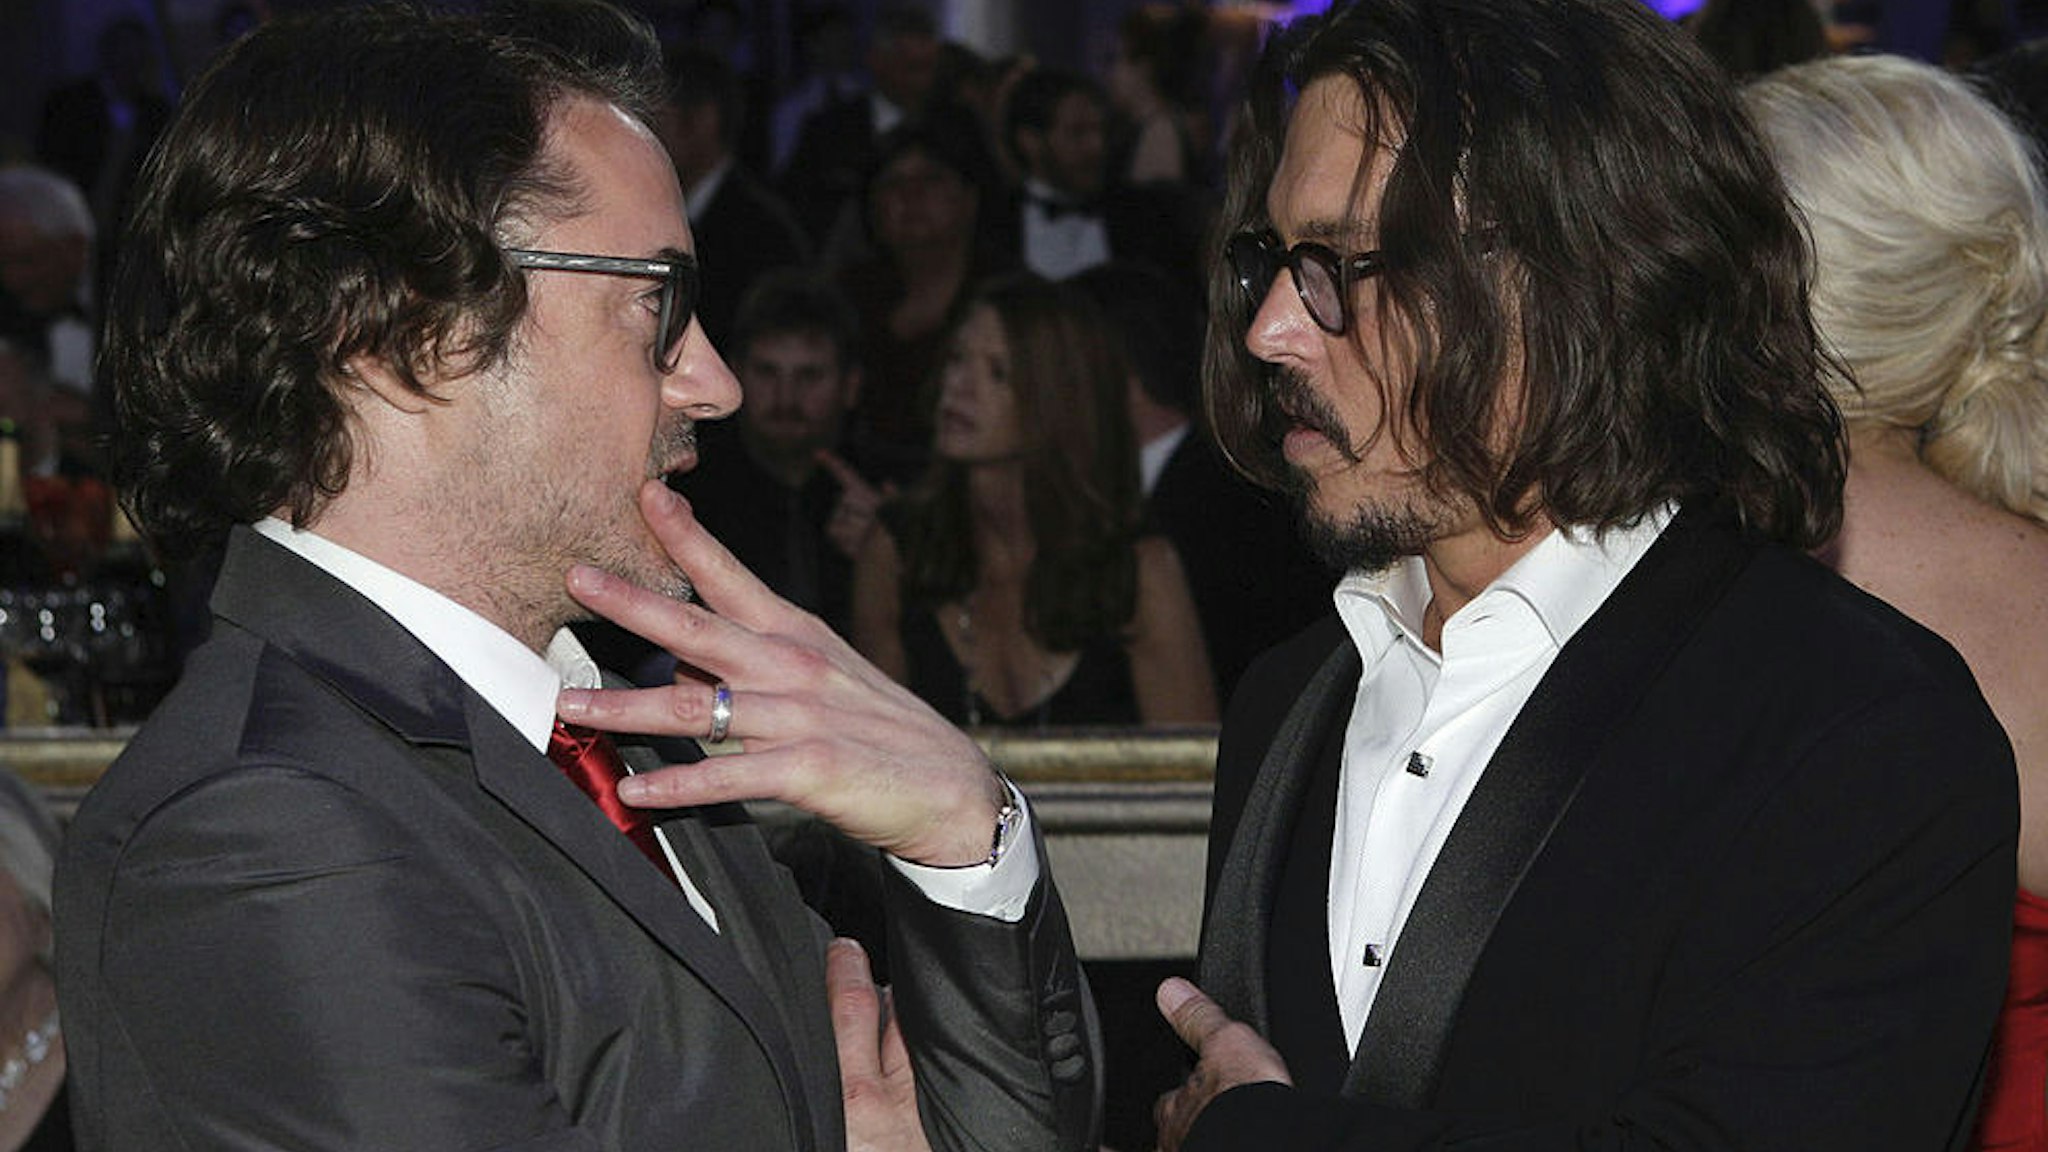 Pictured: (l-r) Robert Downey Jr., Johnny Depp during the 68th Annual Golden Globe Awards held at the Beverly Hilton Hotel on January 16, 2011